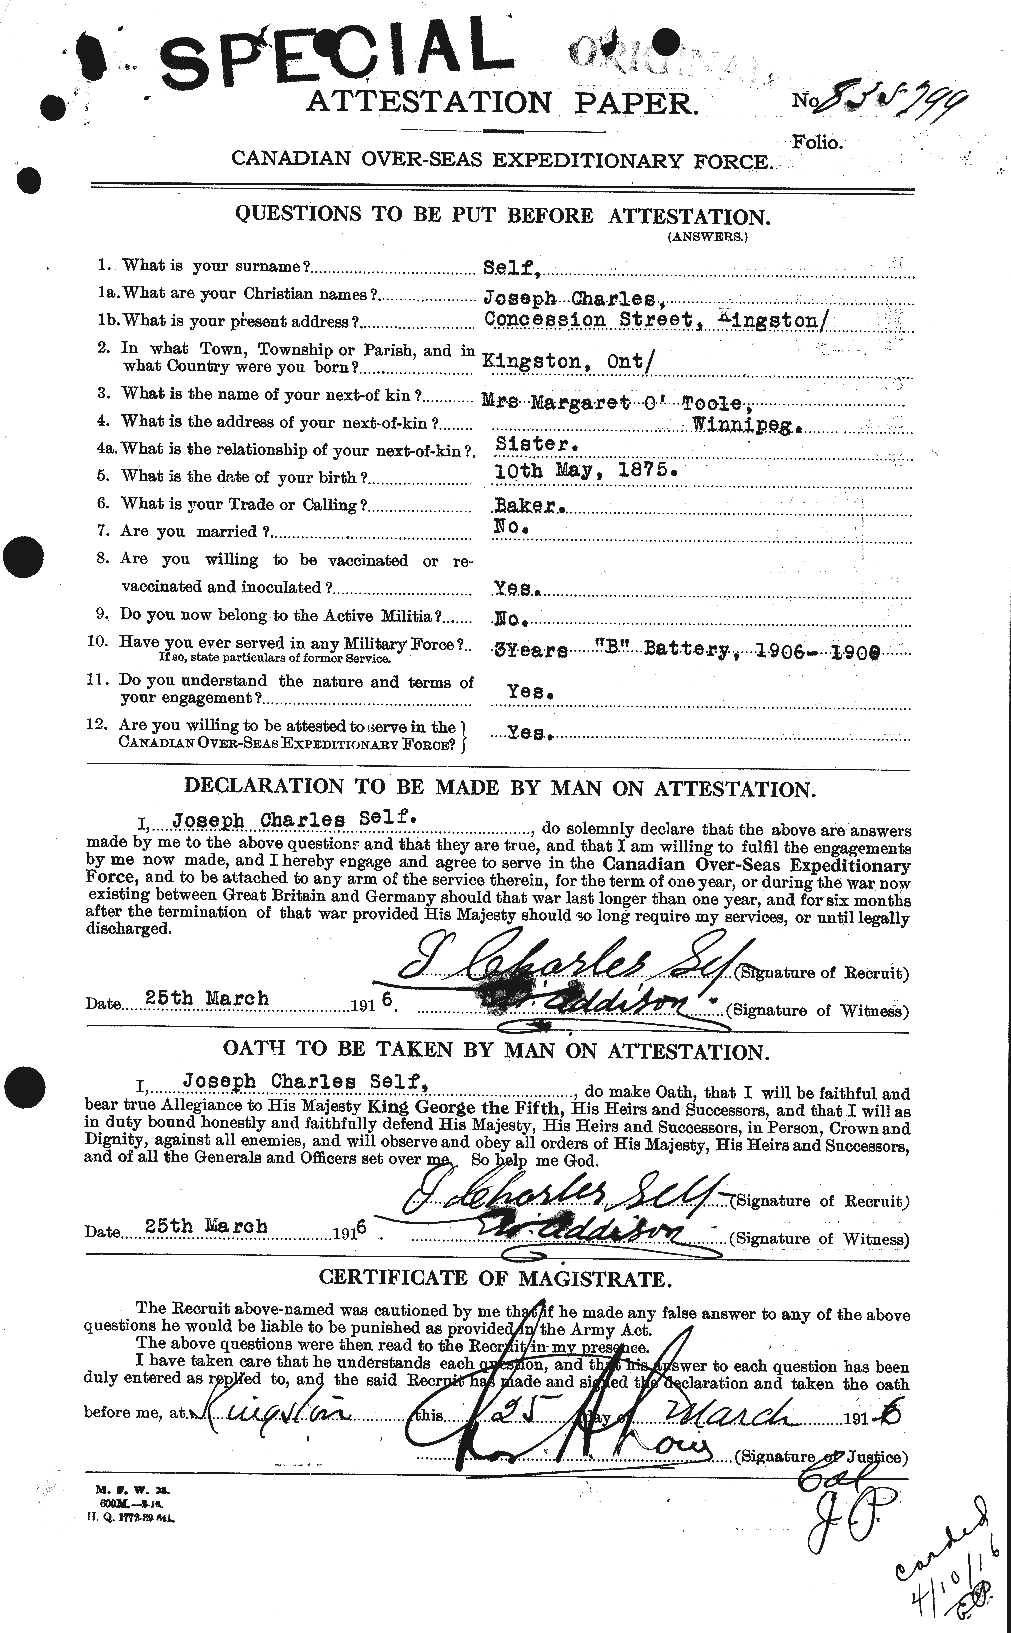 Personnel Records of the First World War - CEF 088381a